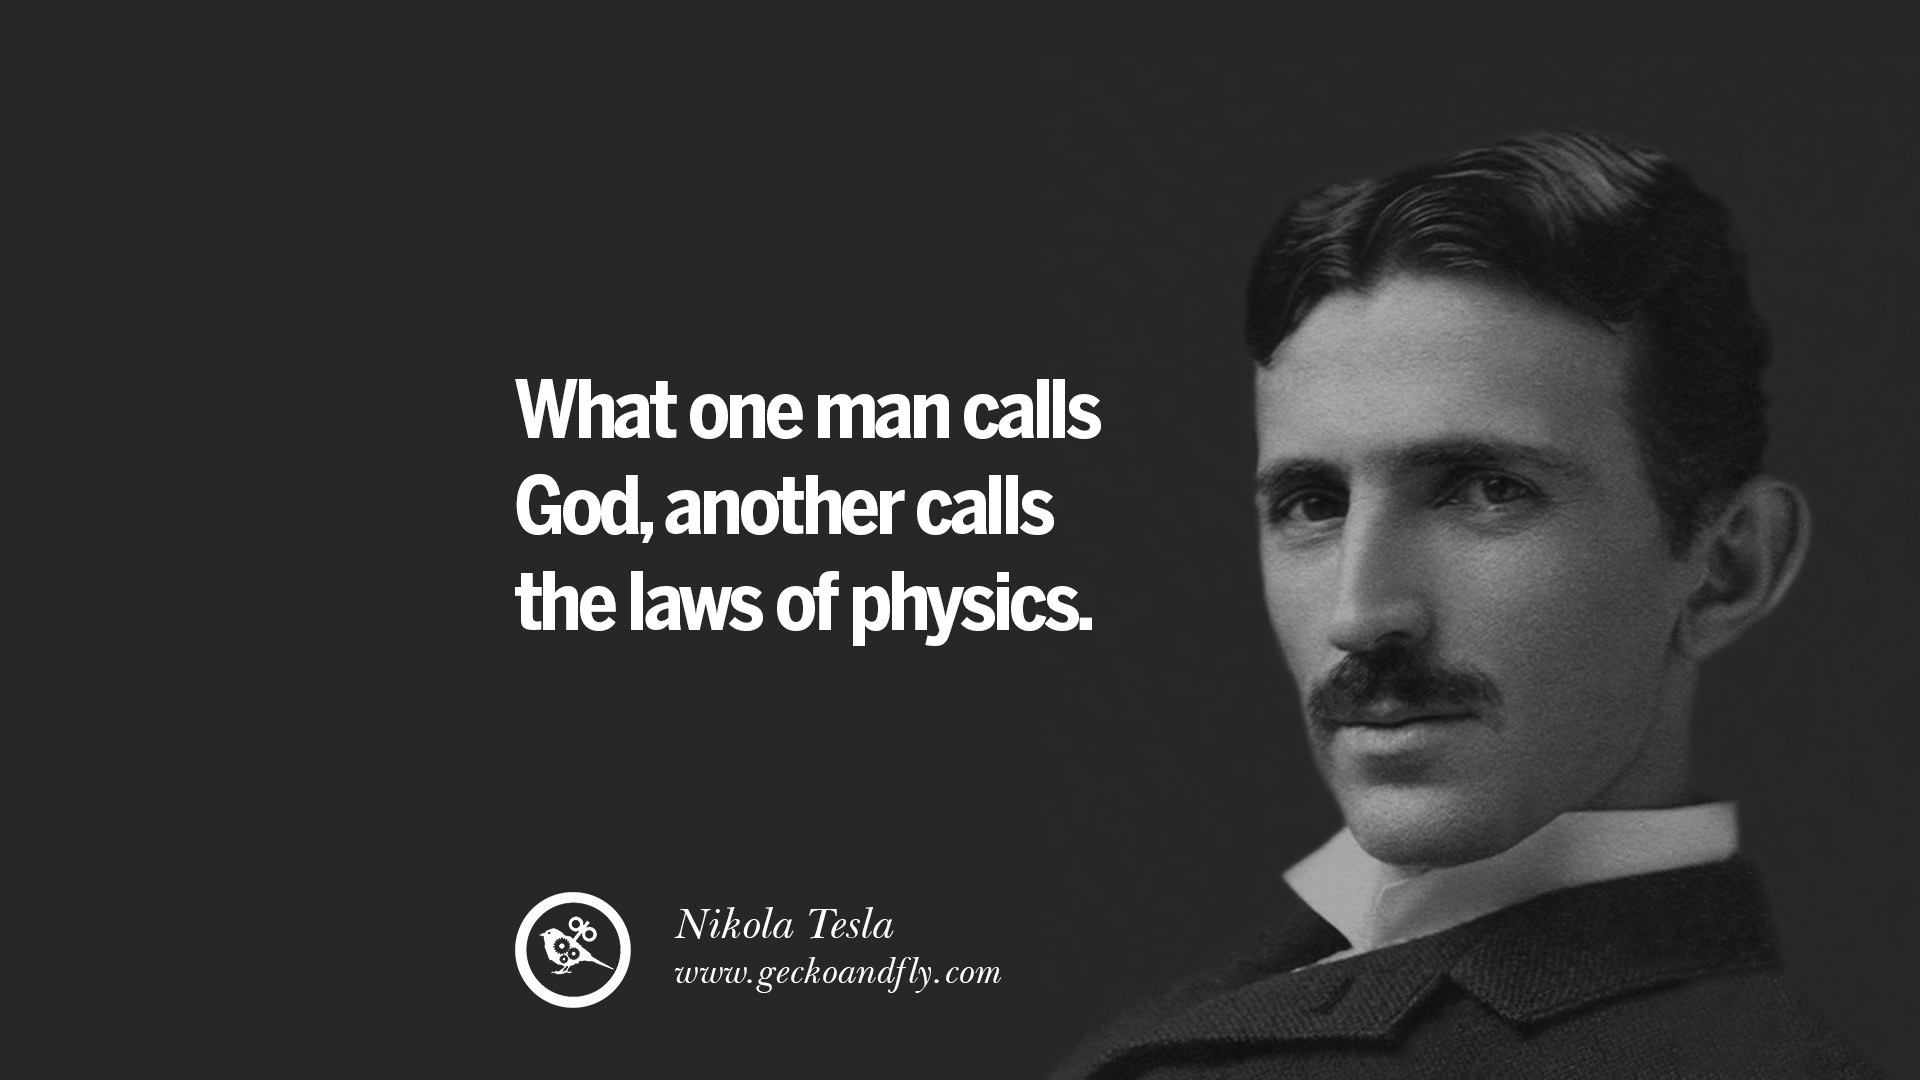 21 Electrifying Nikola Tesla Quotes On Energy, Science And Inventions
 Energy Physics Quotes